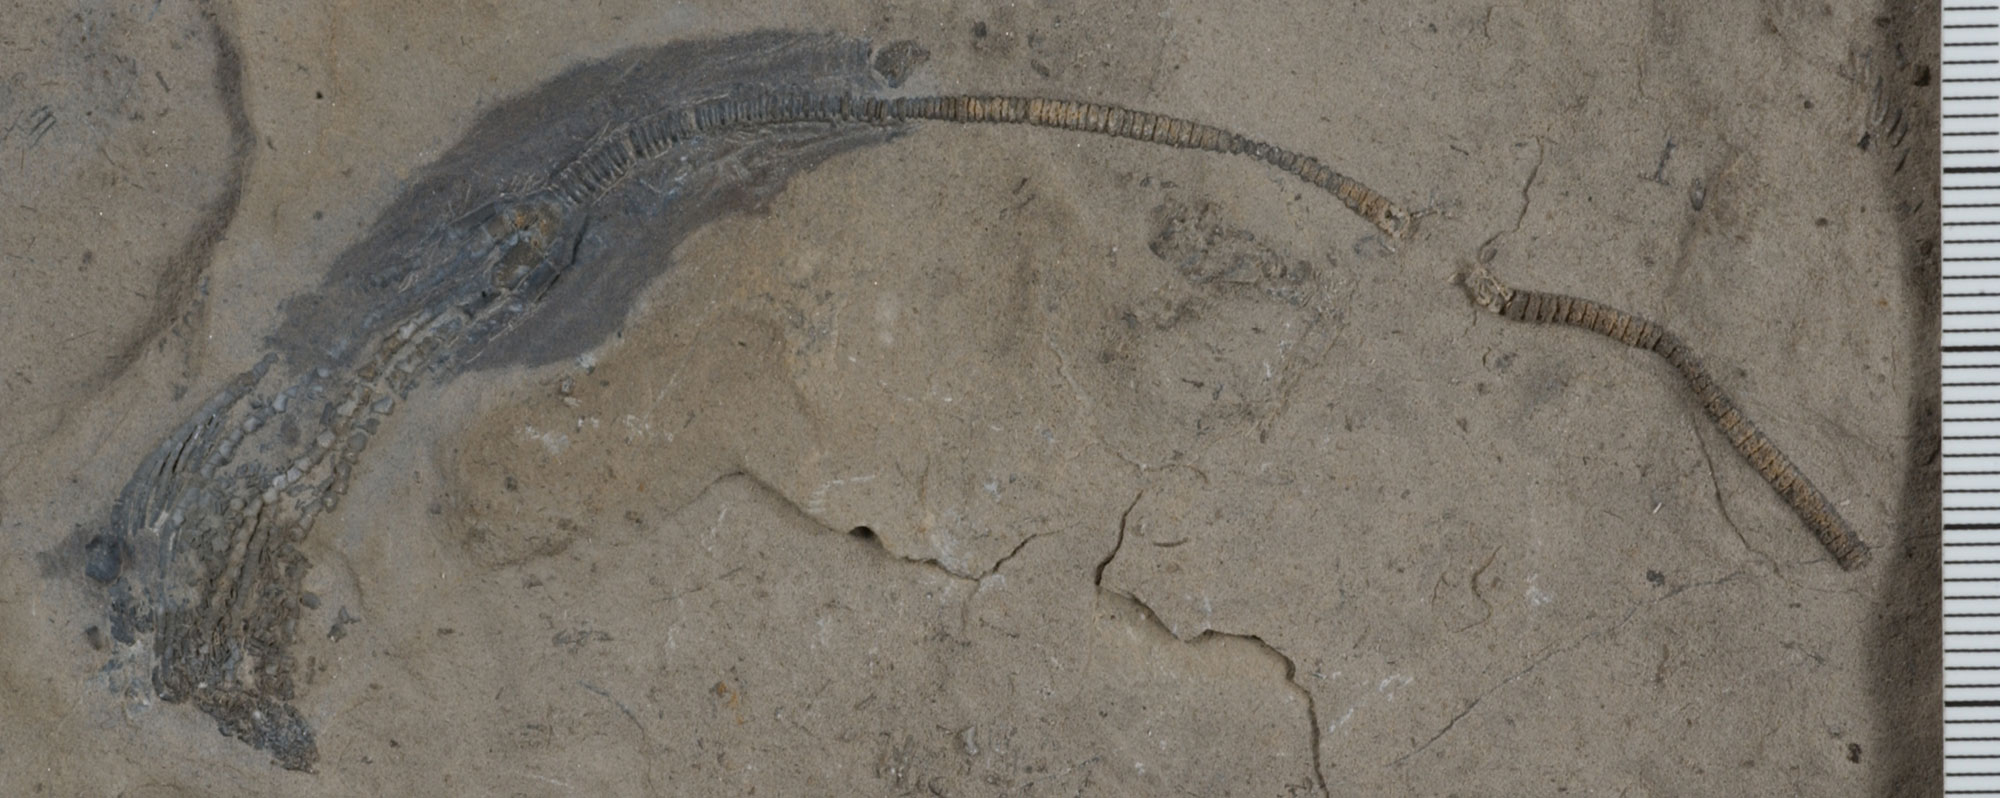 Photograph of a crinoid from the Mississippian of Utah. The crinoid is preserved on a medium brown stone. The stalk is on the right and the calyx and arms on left. The specimen arcs from one side to the other in the figure. It is probably in the range of 10 centimeters long.